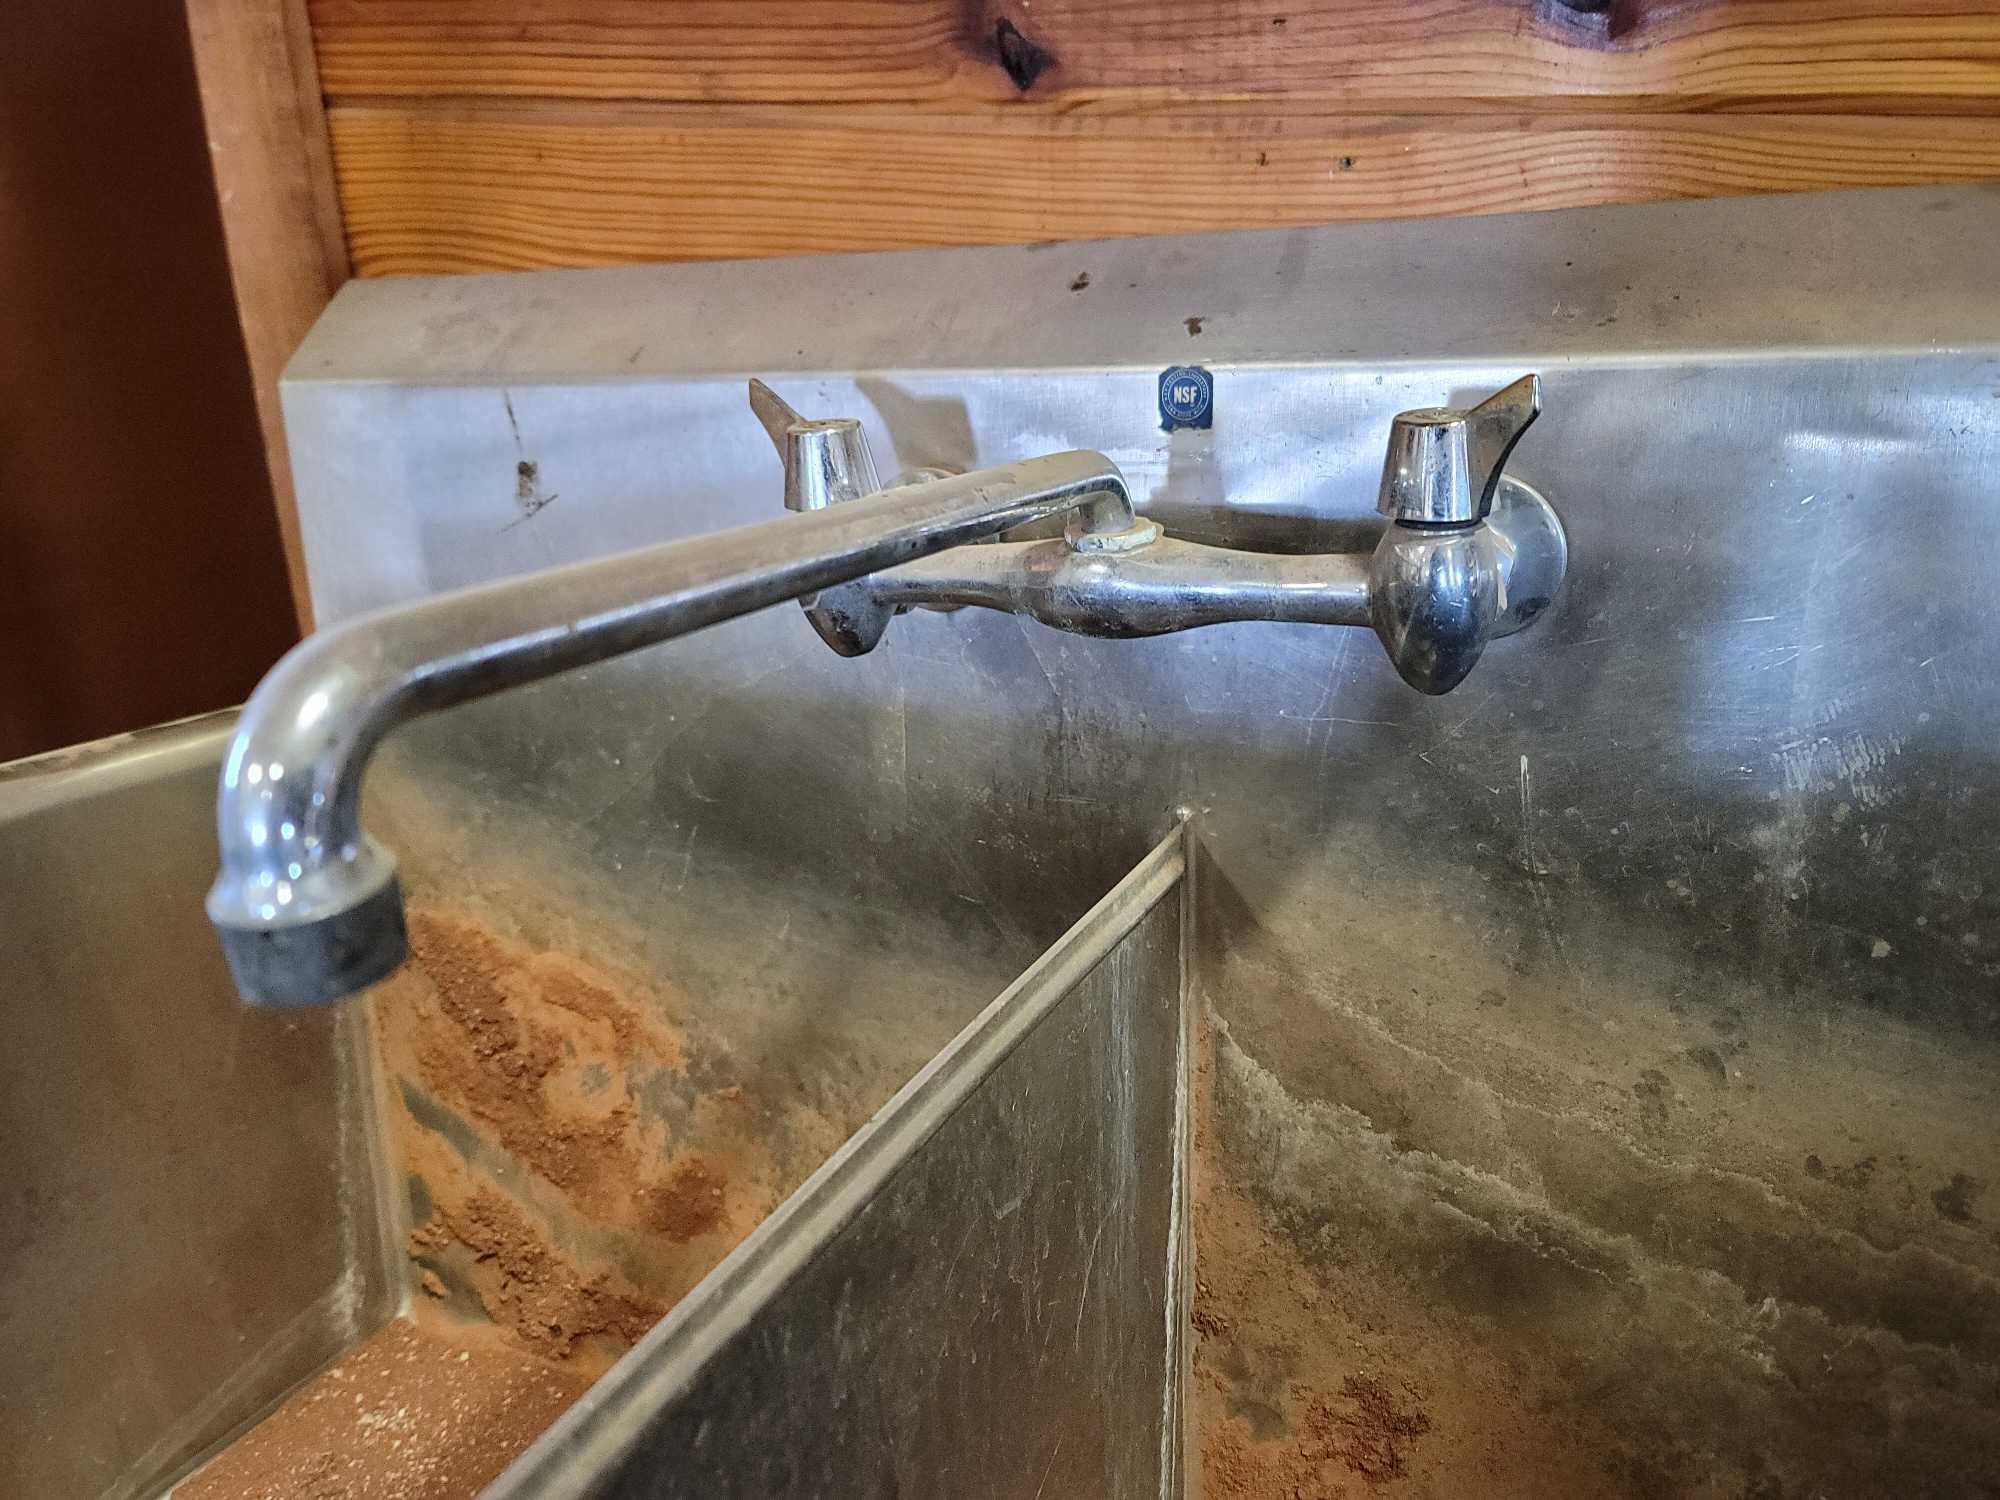 Stainless steel commercial double deep sink